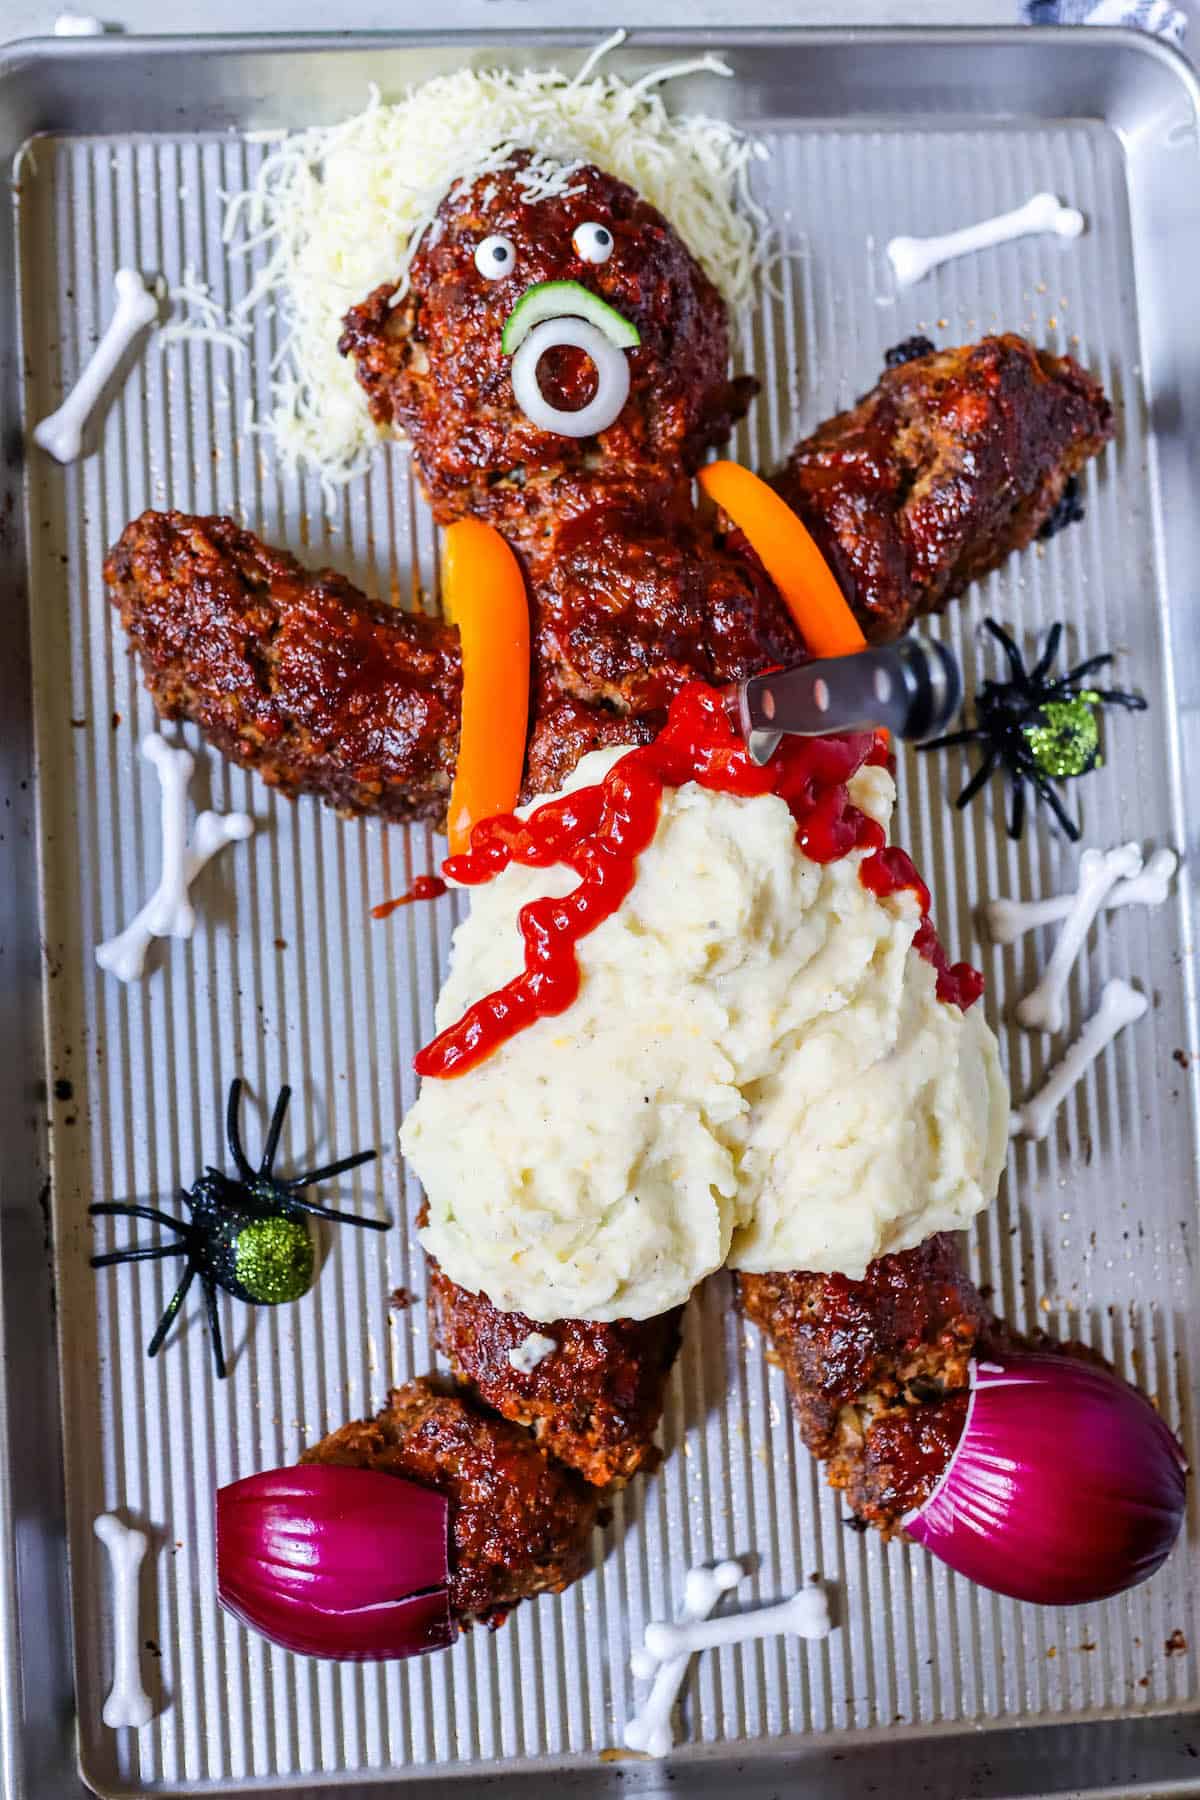 A metal pan with a stuffed teddy bear on it, resembling a whimsical yet macabre dead man meatloaf.